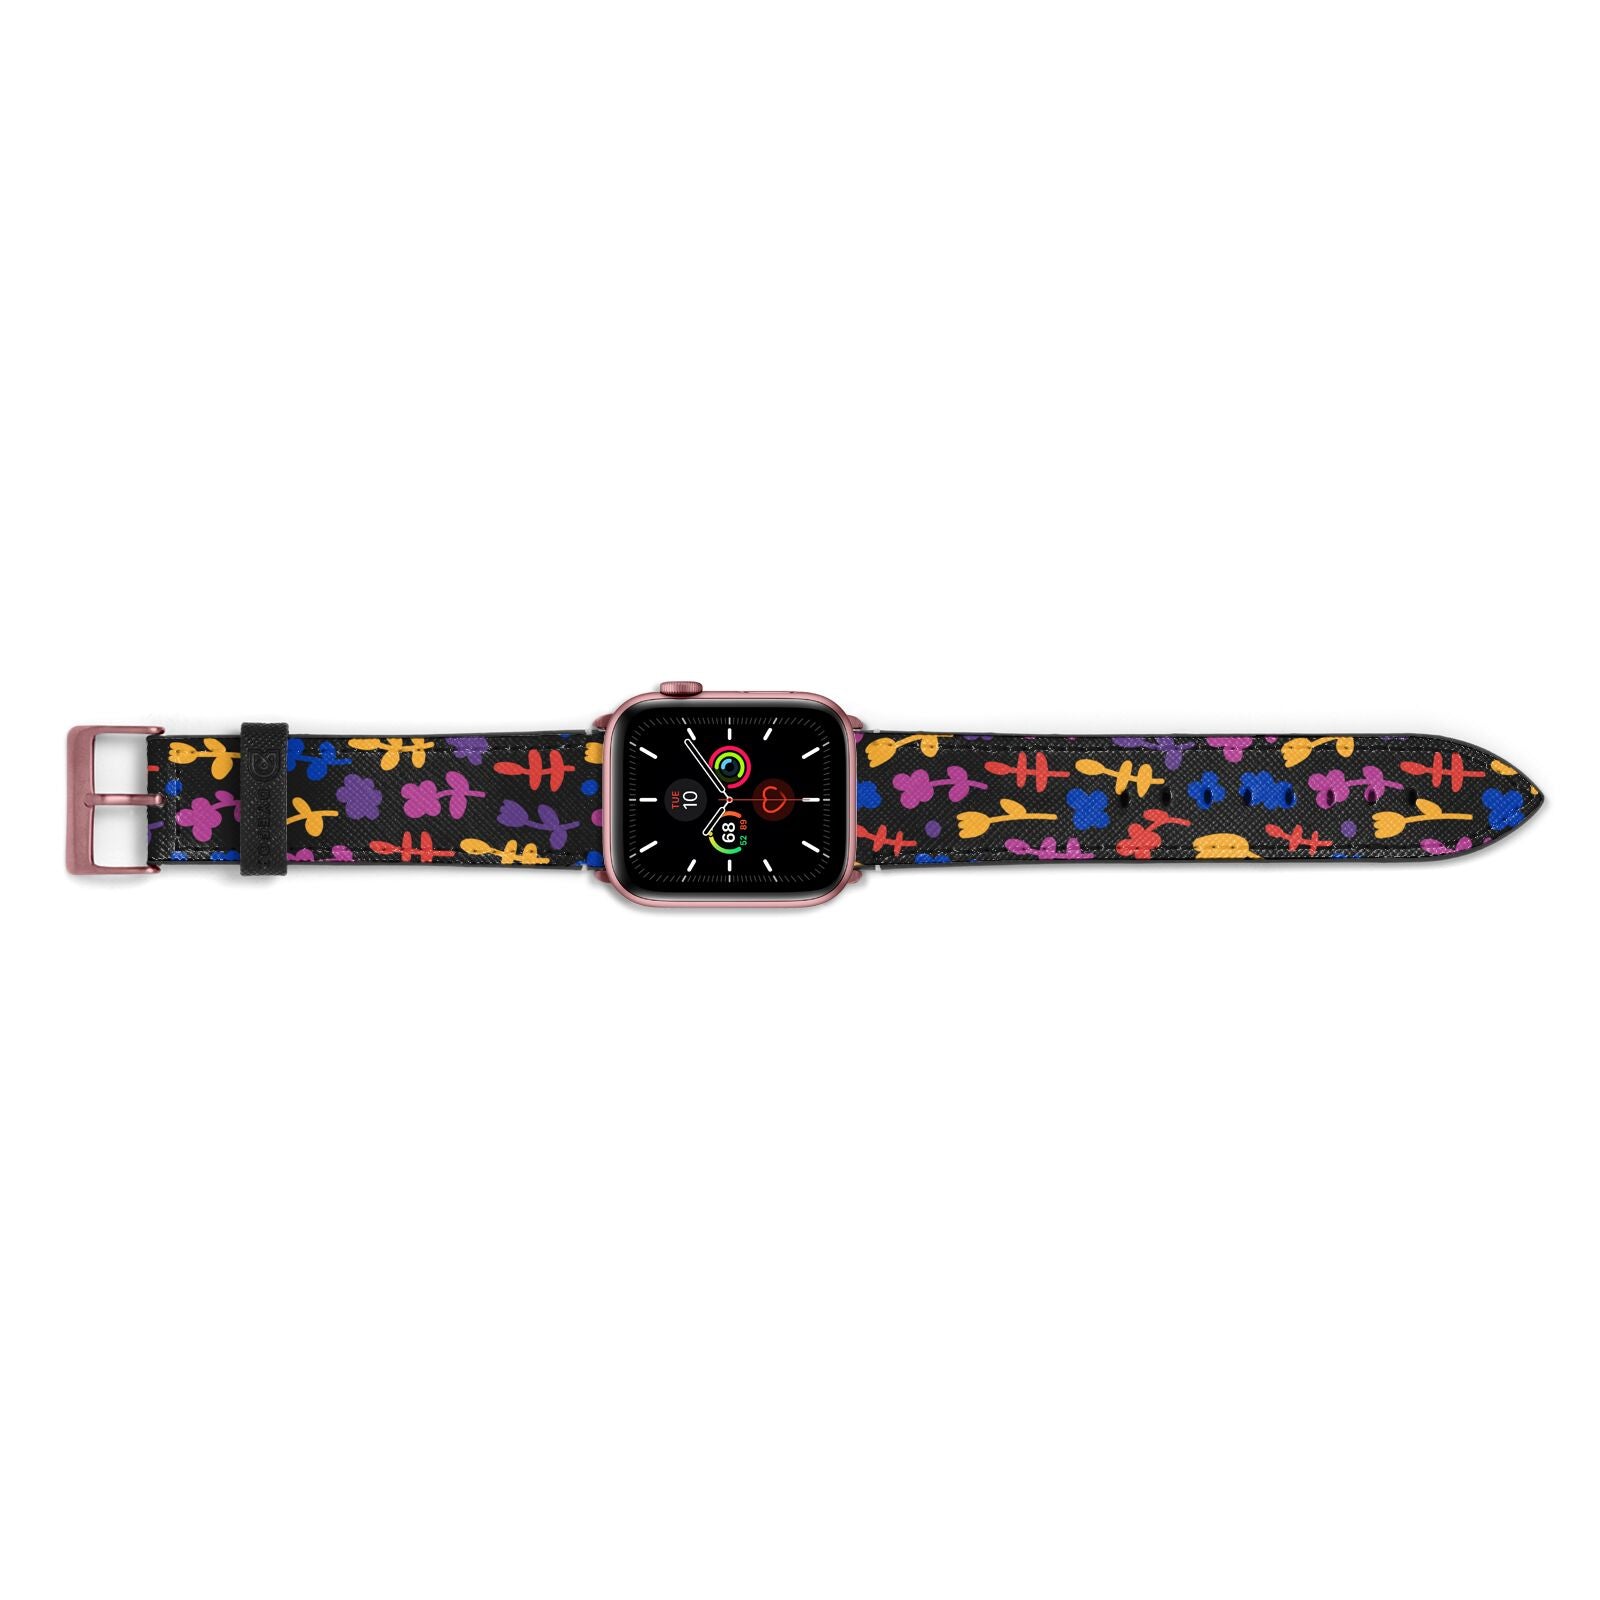 Abstract Floral Apple Watch Strap Landscape Image Rose Gold Hardware